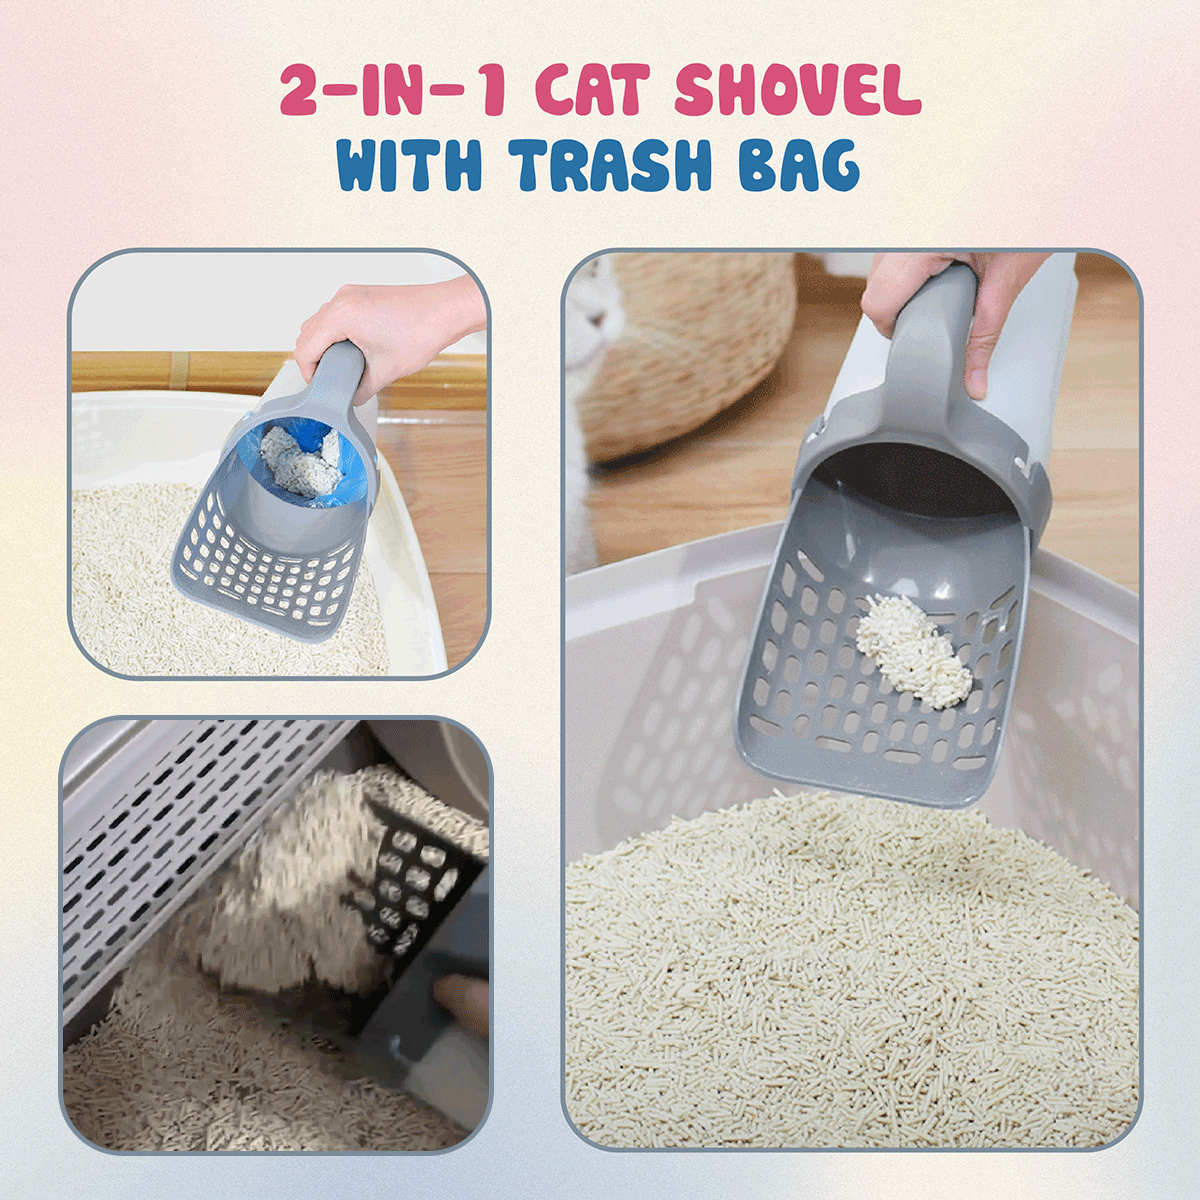 Scooper Self-cleaning Large Capacity Cat Shovel with Built-in Poop Bag